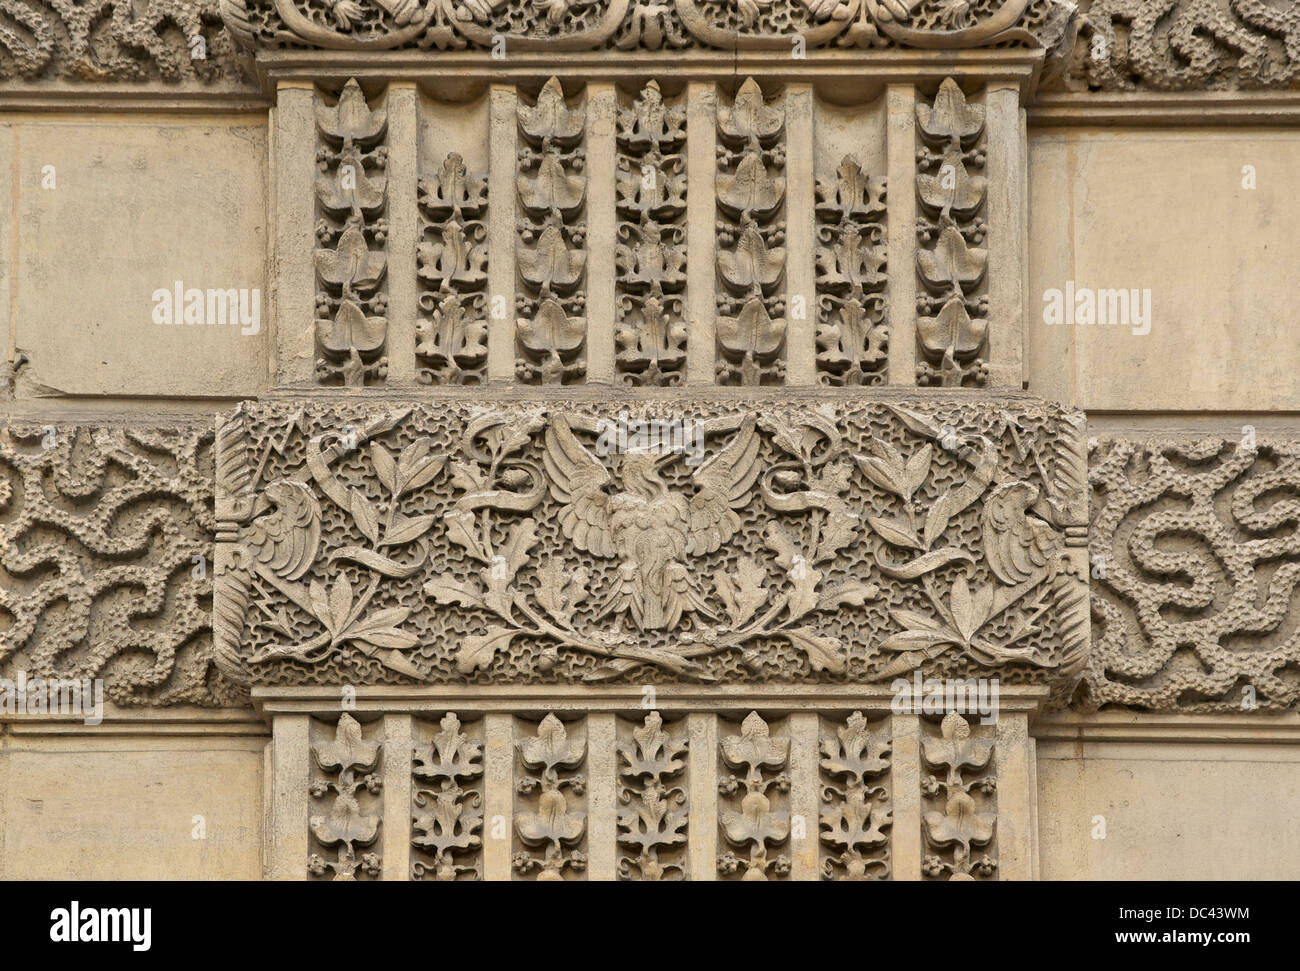 Imperial eagle and thunderbolts on a wall of the Louvre Palace in Paris. Stock Photo